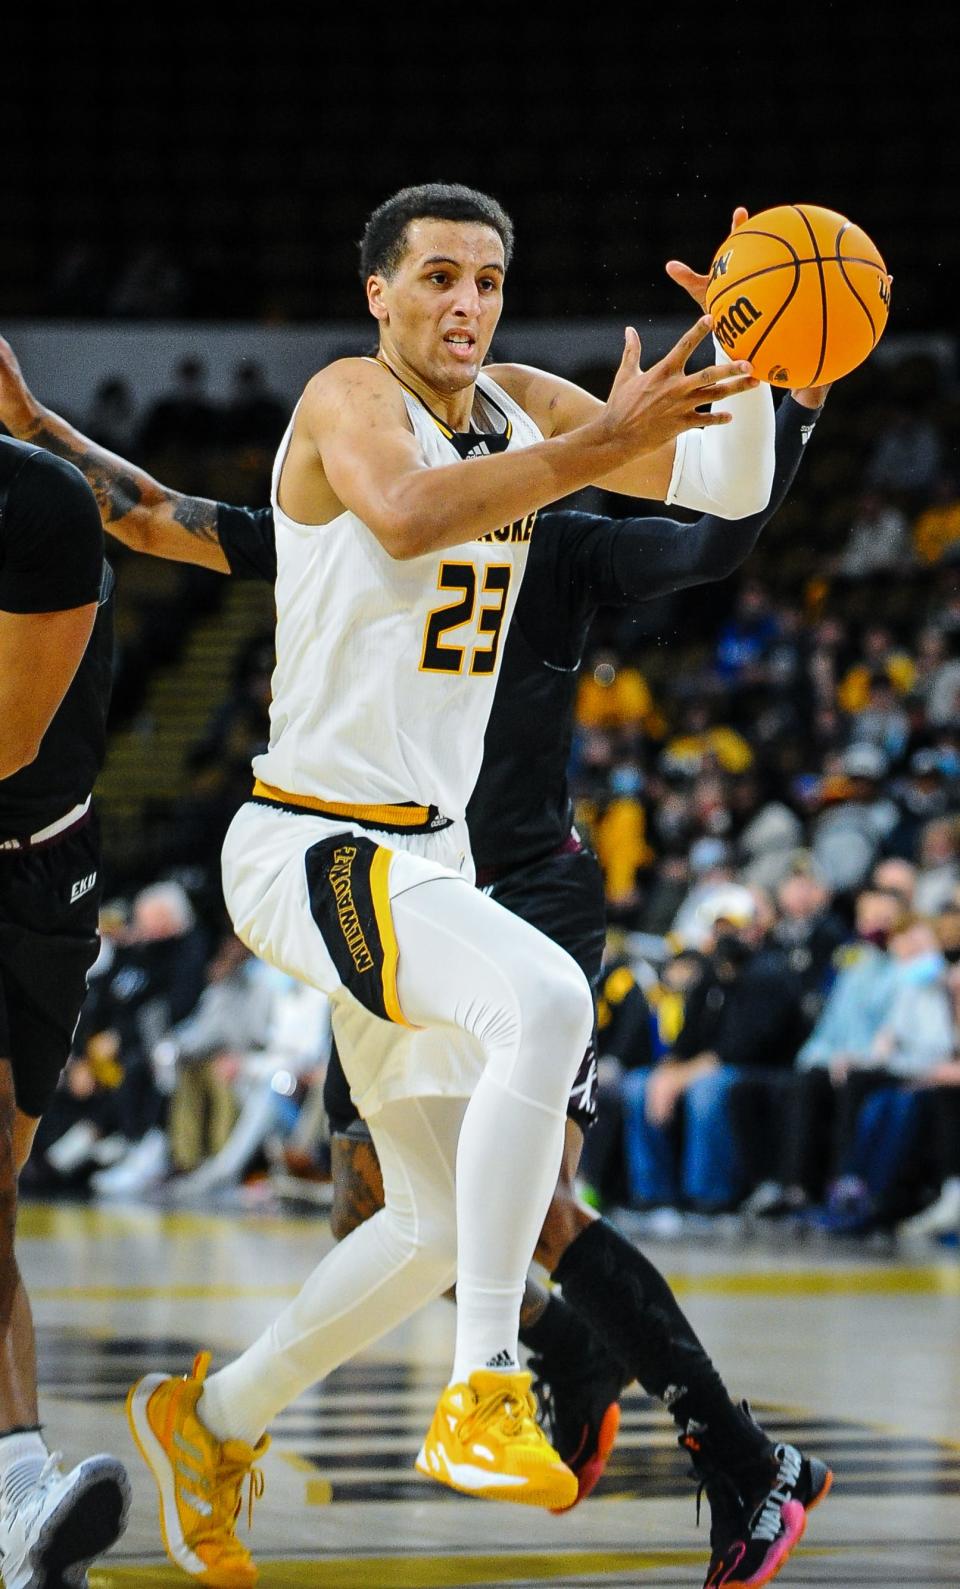 Patrick Baldwin Jr. played in just 11 games for UW-Milwaukee as a freshman.